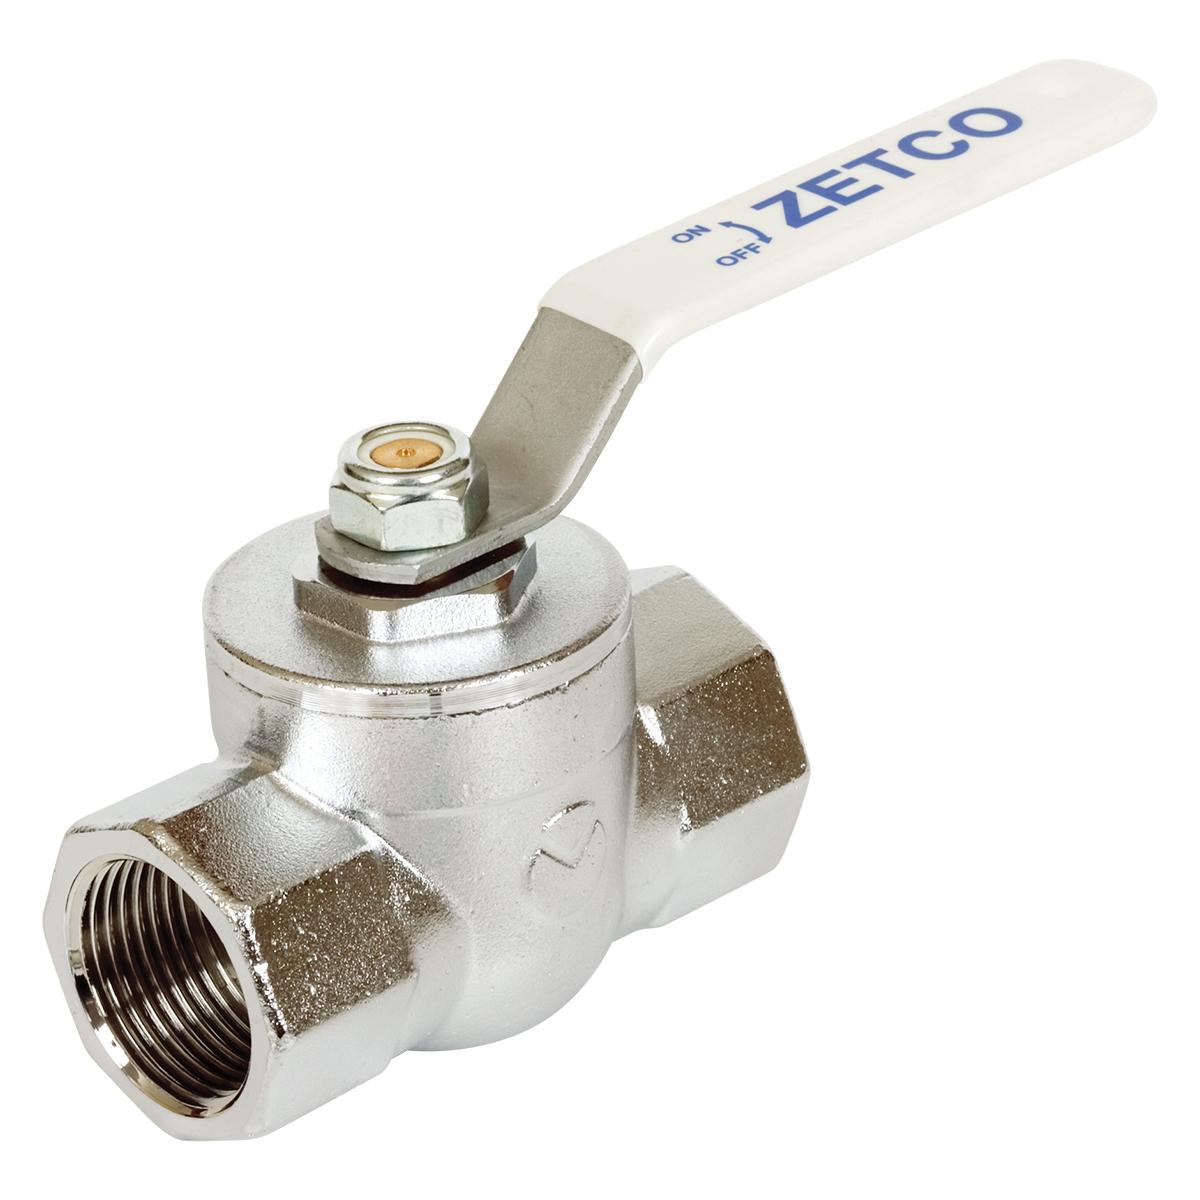 BALL VALVE T4 TOP ENTRY MEDICAL GAS CLEA